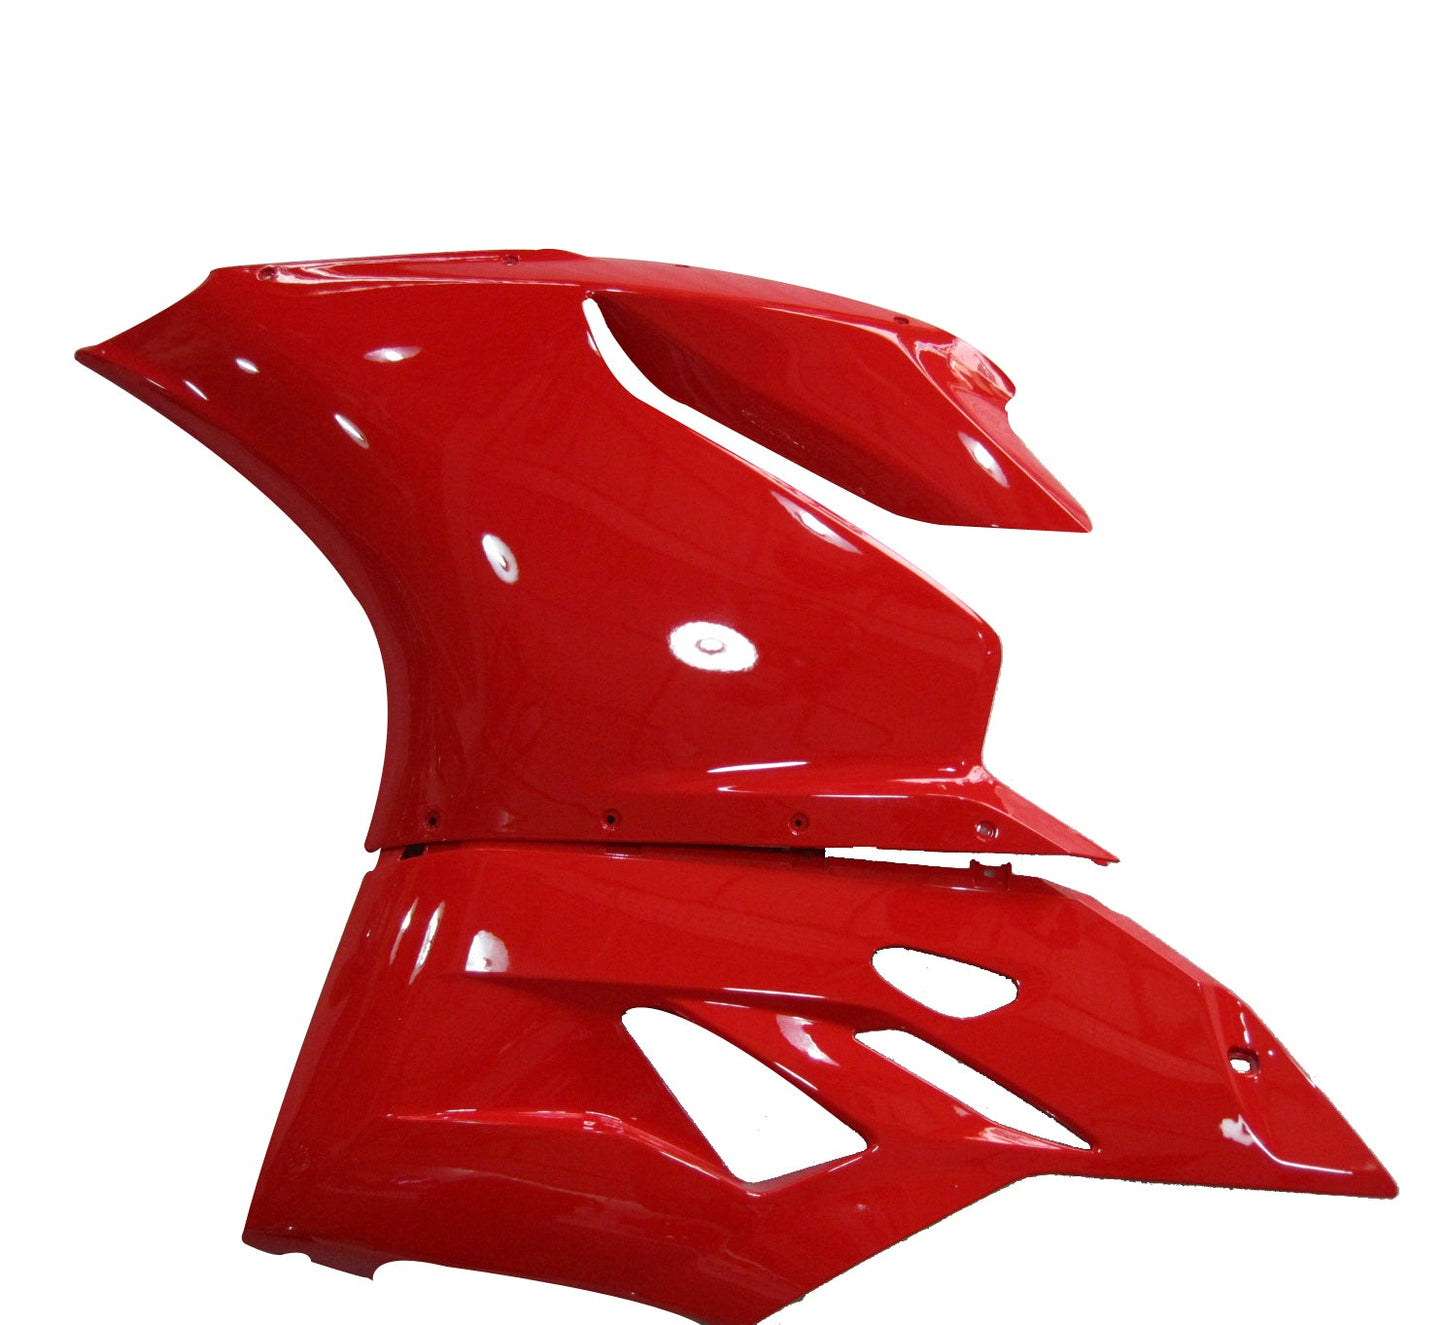 Amotopart 2012-2014 Ducati 1199 899 Rouge Crazy Kit